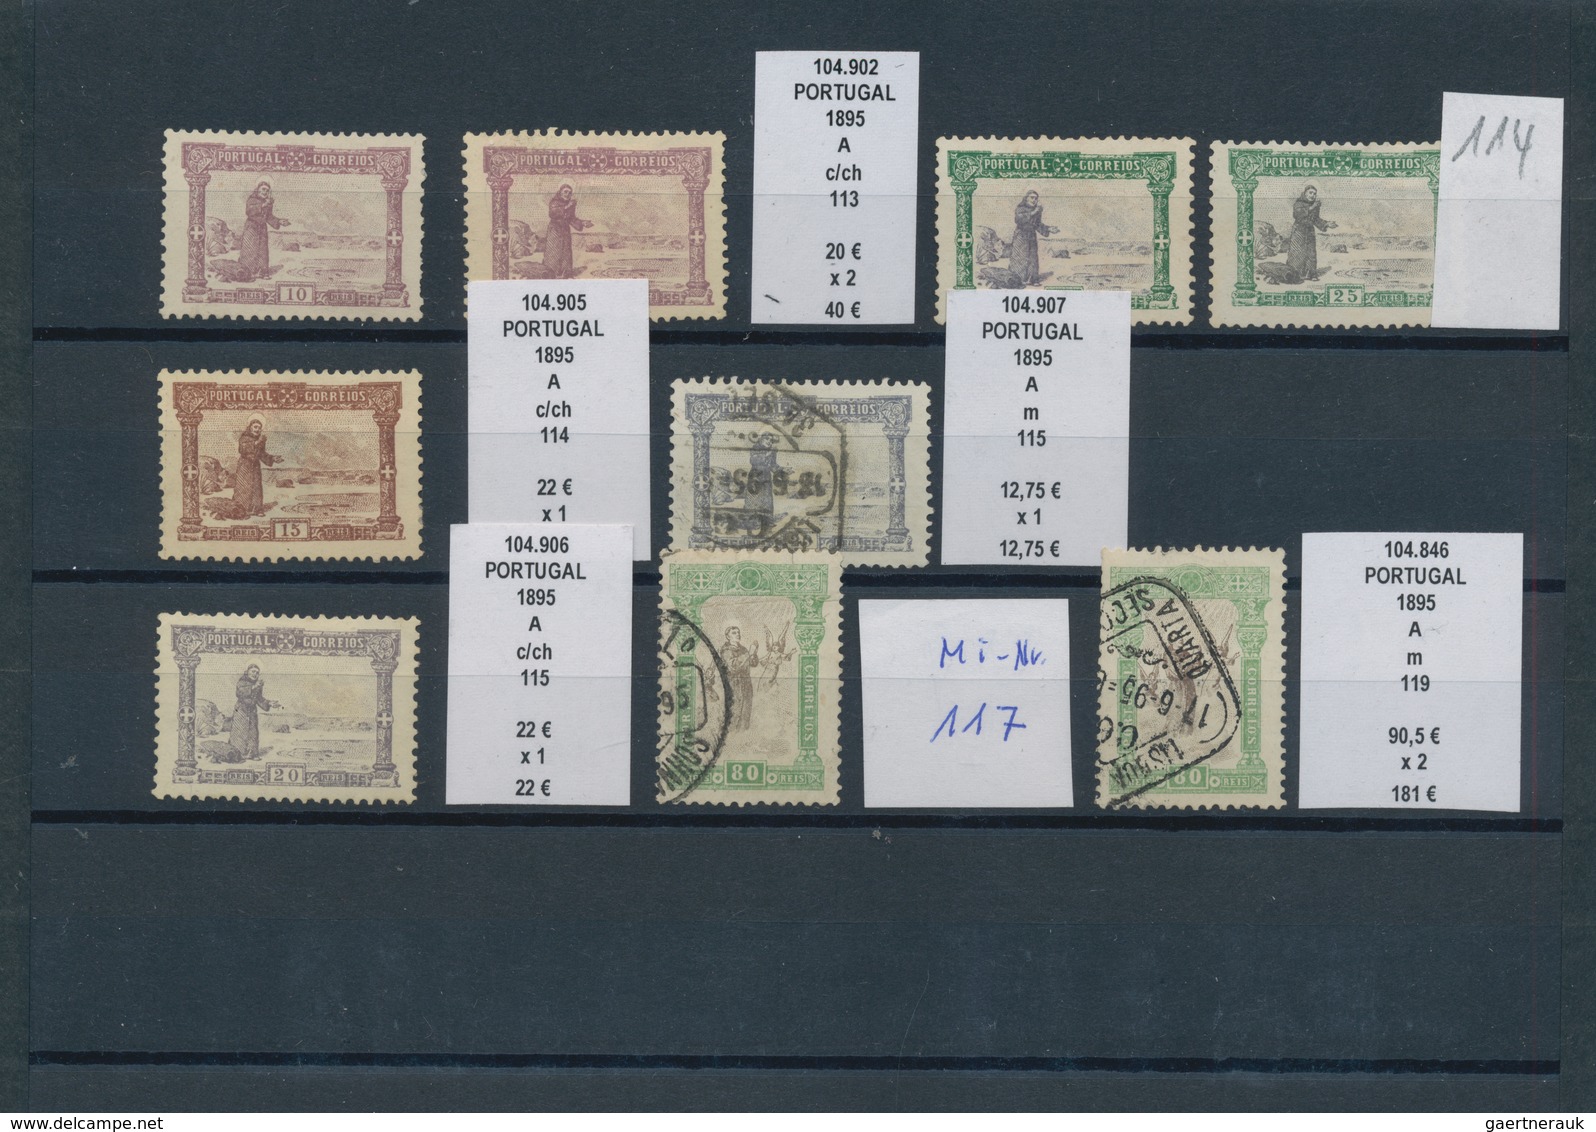 Portugal: 1894/1895, nice lot with only value of the sets ""Prince Henry" and "Siant Antonio" used a